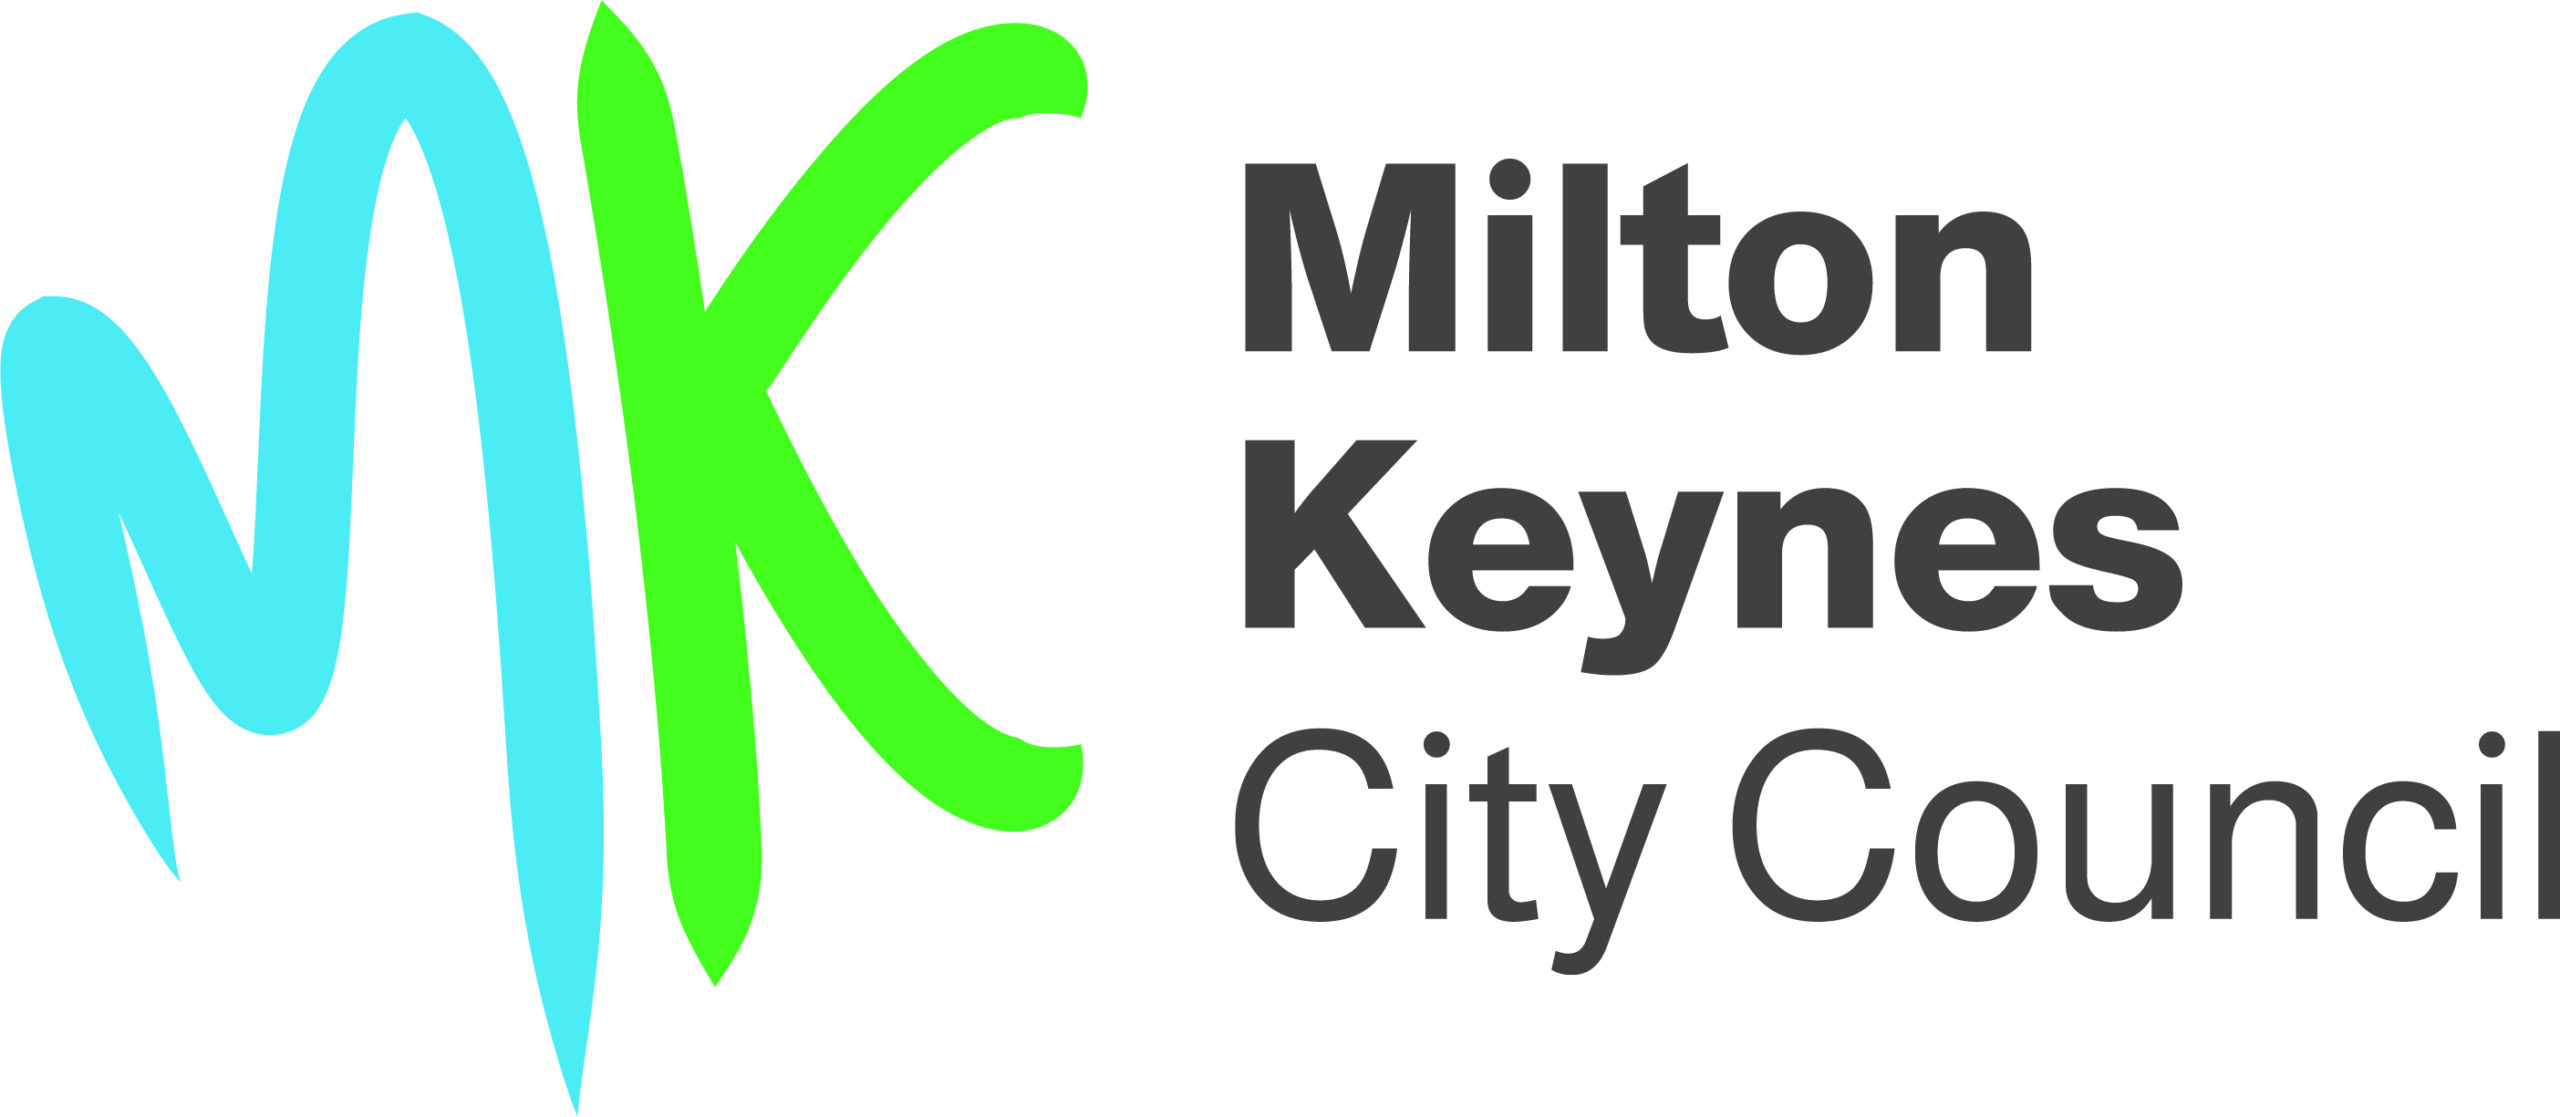 A blue letter M and green letter K with the words Milton Keynes City Council next to it